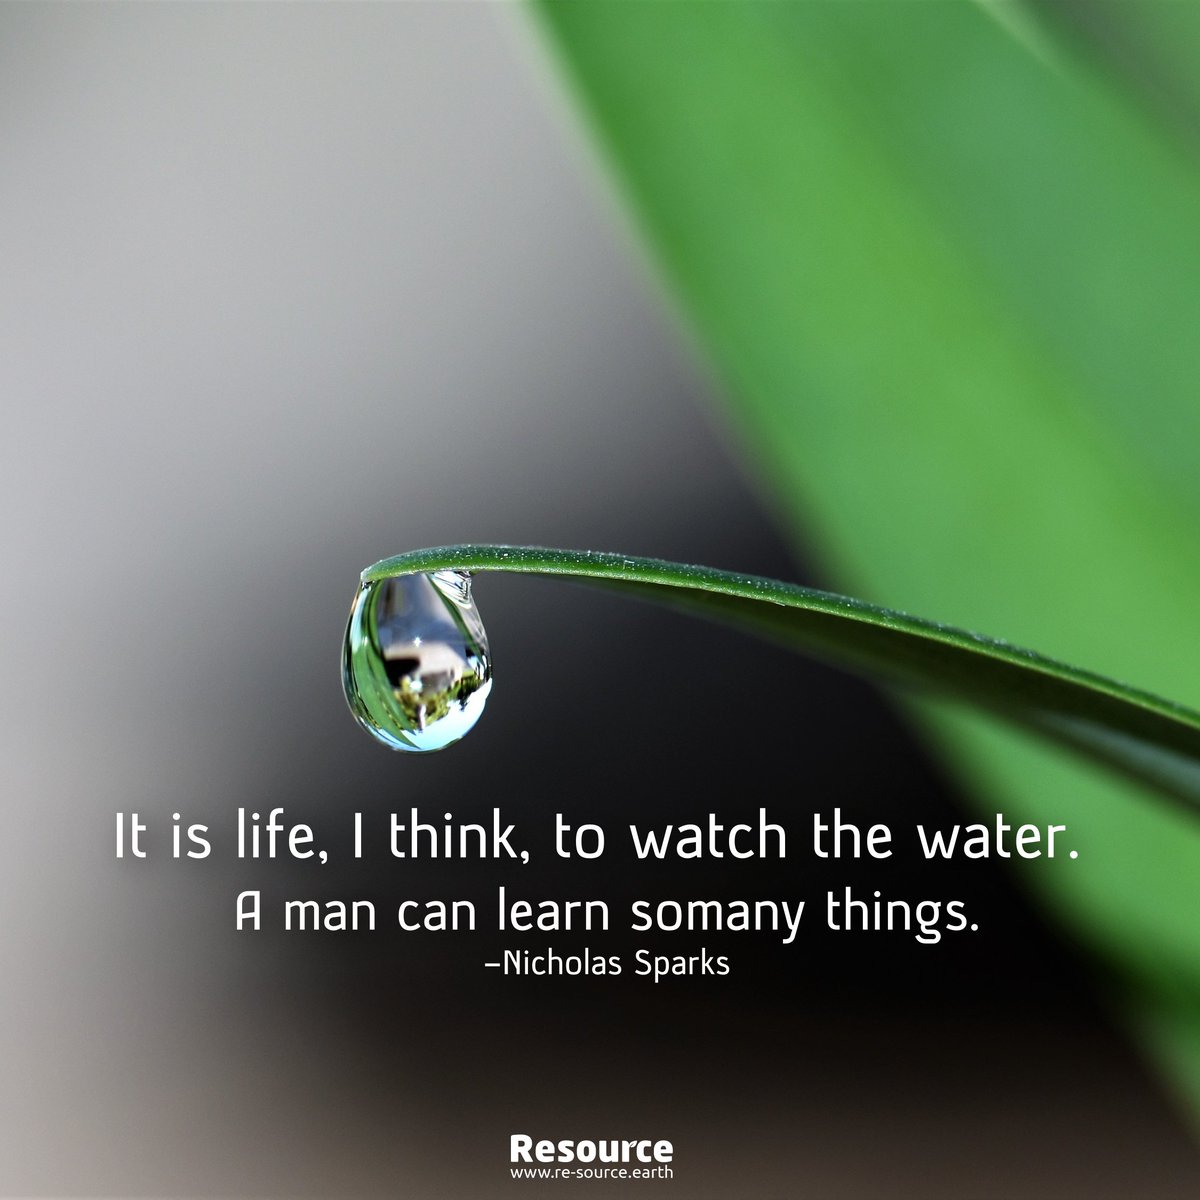 It is Life 

#life #water #cleanwateract #watermanagement #ozonatedwater #waterlover #natures #gogreen💚 #greenday #cleanwatermovement